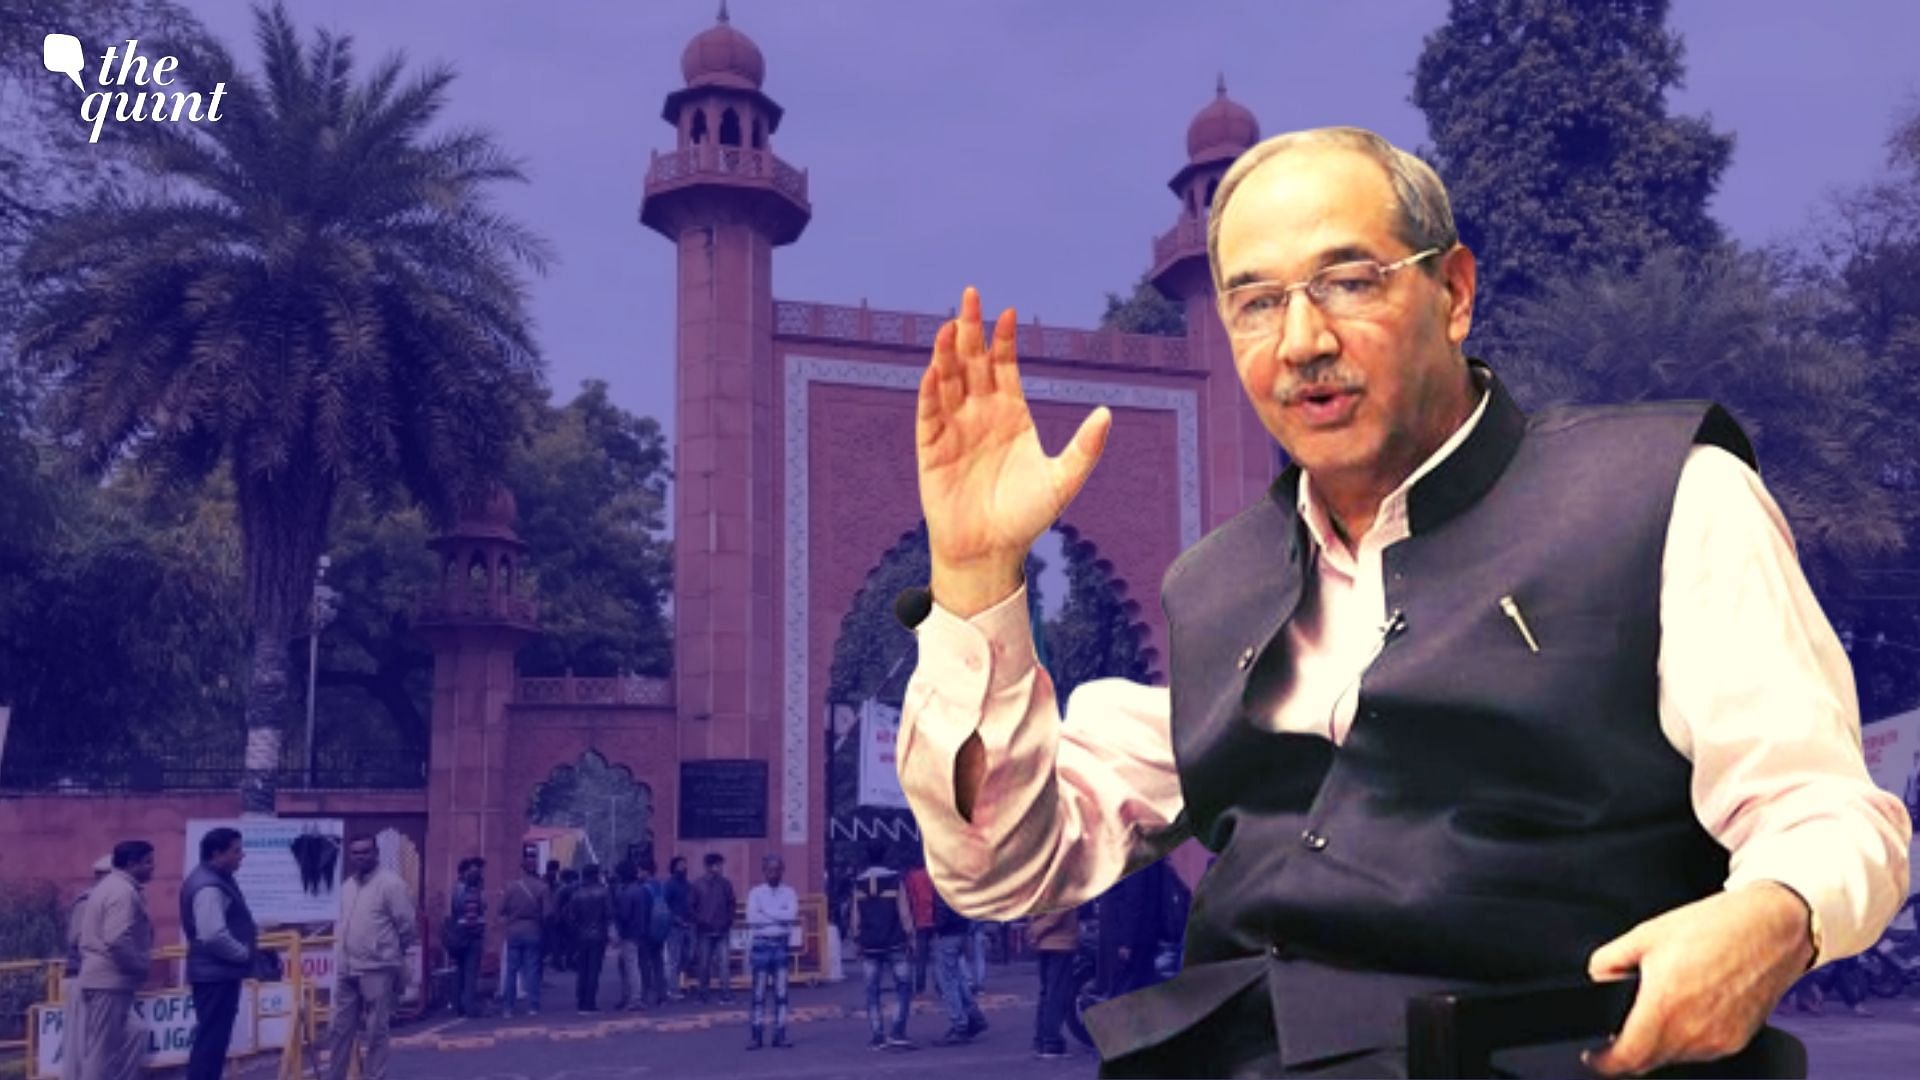 “Anti-social/lumpen elements intermingled with students, and forcibly broke open the university gate,” AMU vice-chancellor Professor Tariq Mansoor said.